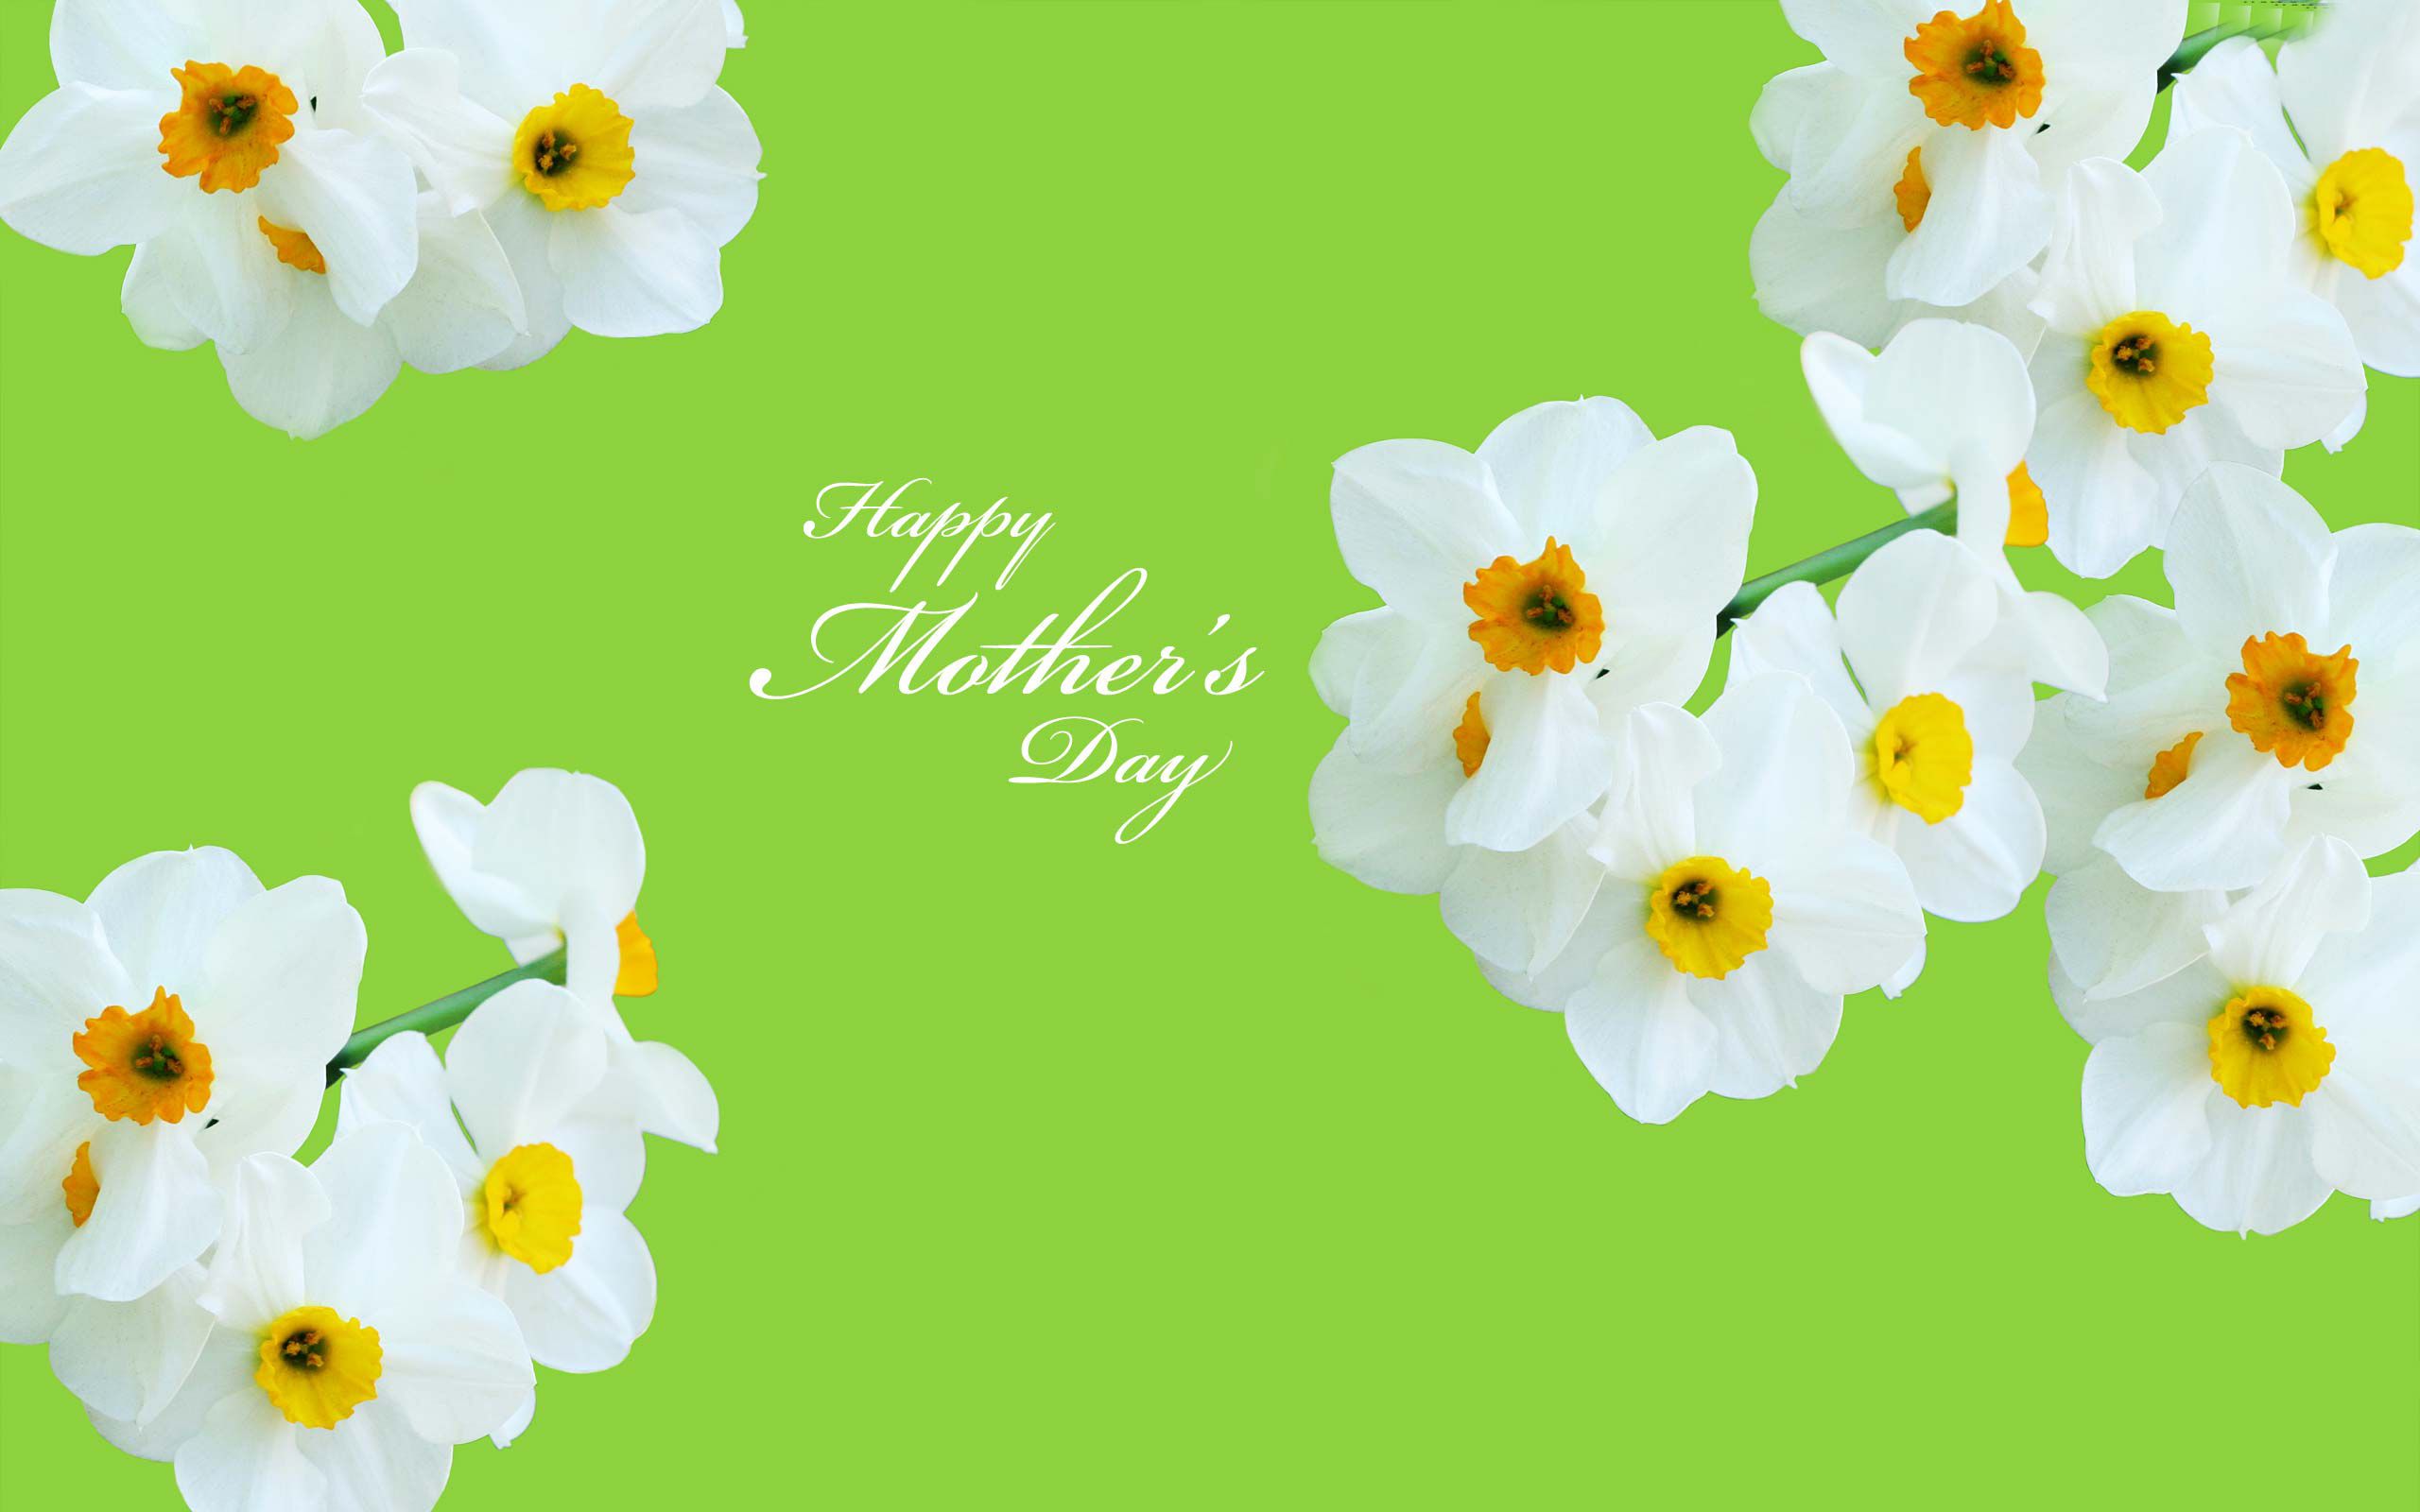 Happy Mothers Day HD Image Wallpaper Free Download 1